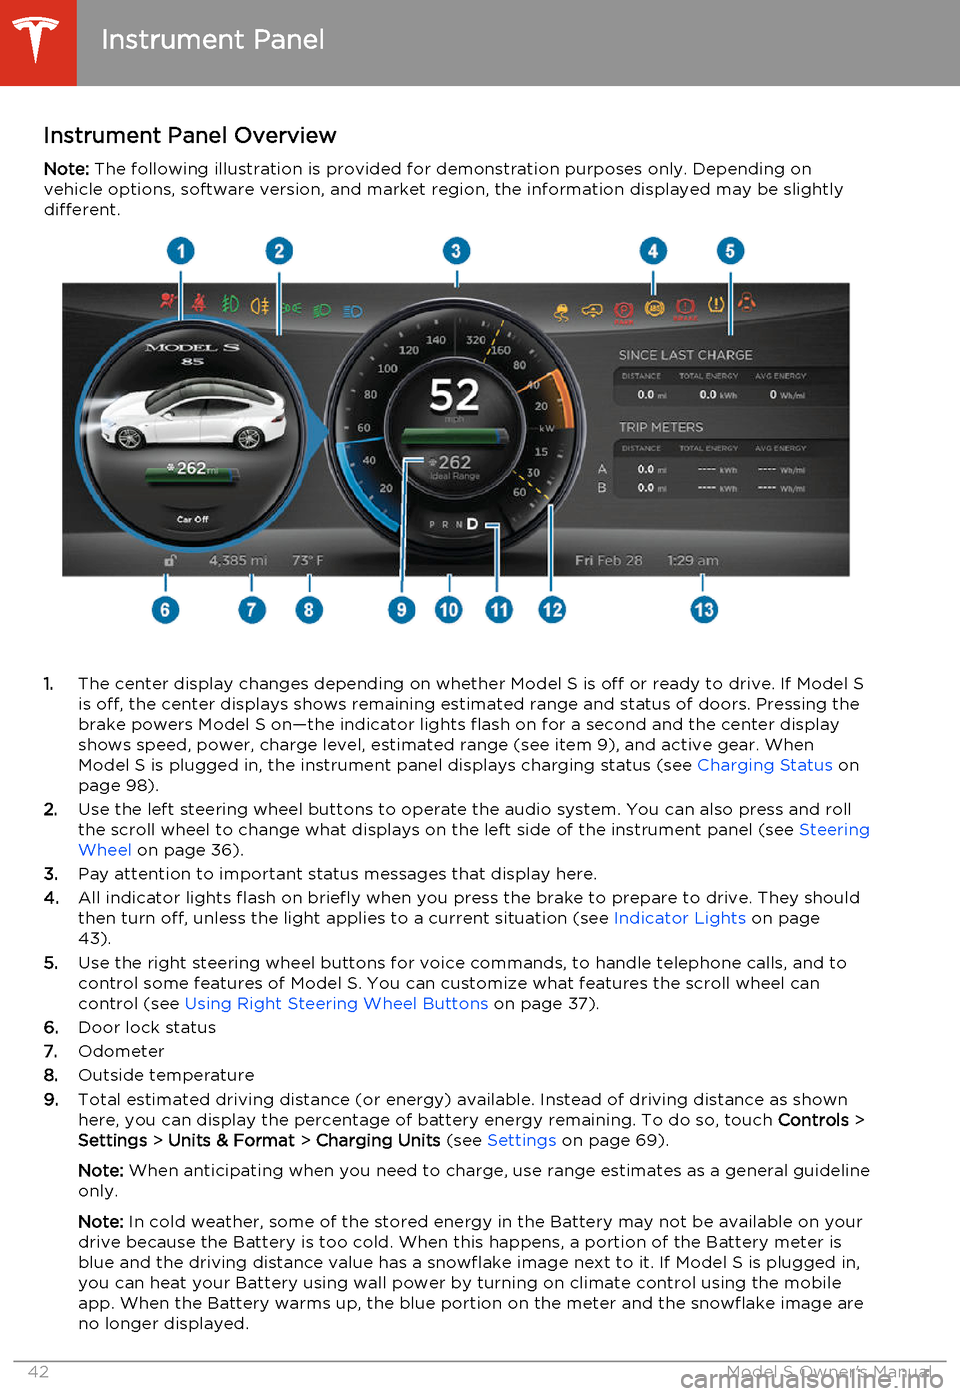 TESLA MODEL S 2014  Owners manual (North America) Instrument Panel OverviewNote:  The following illustration is provided for demonstration purposes only. Depending on
vehicle options, software version, and market region, the information displayed may